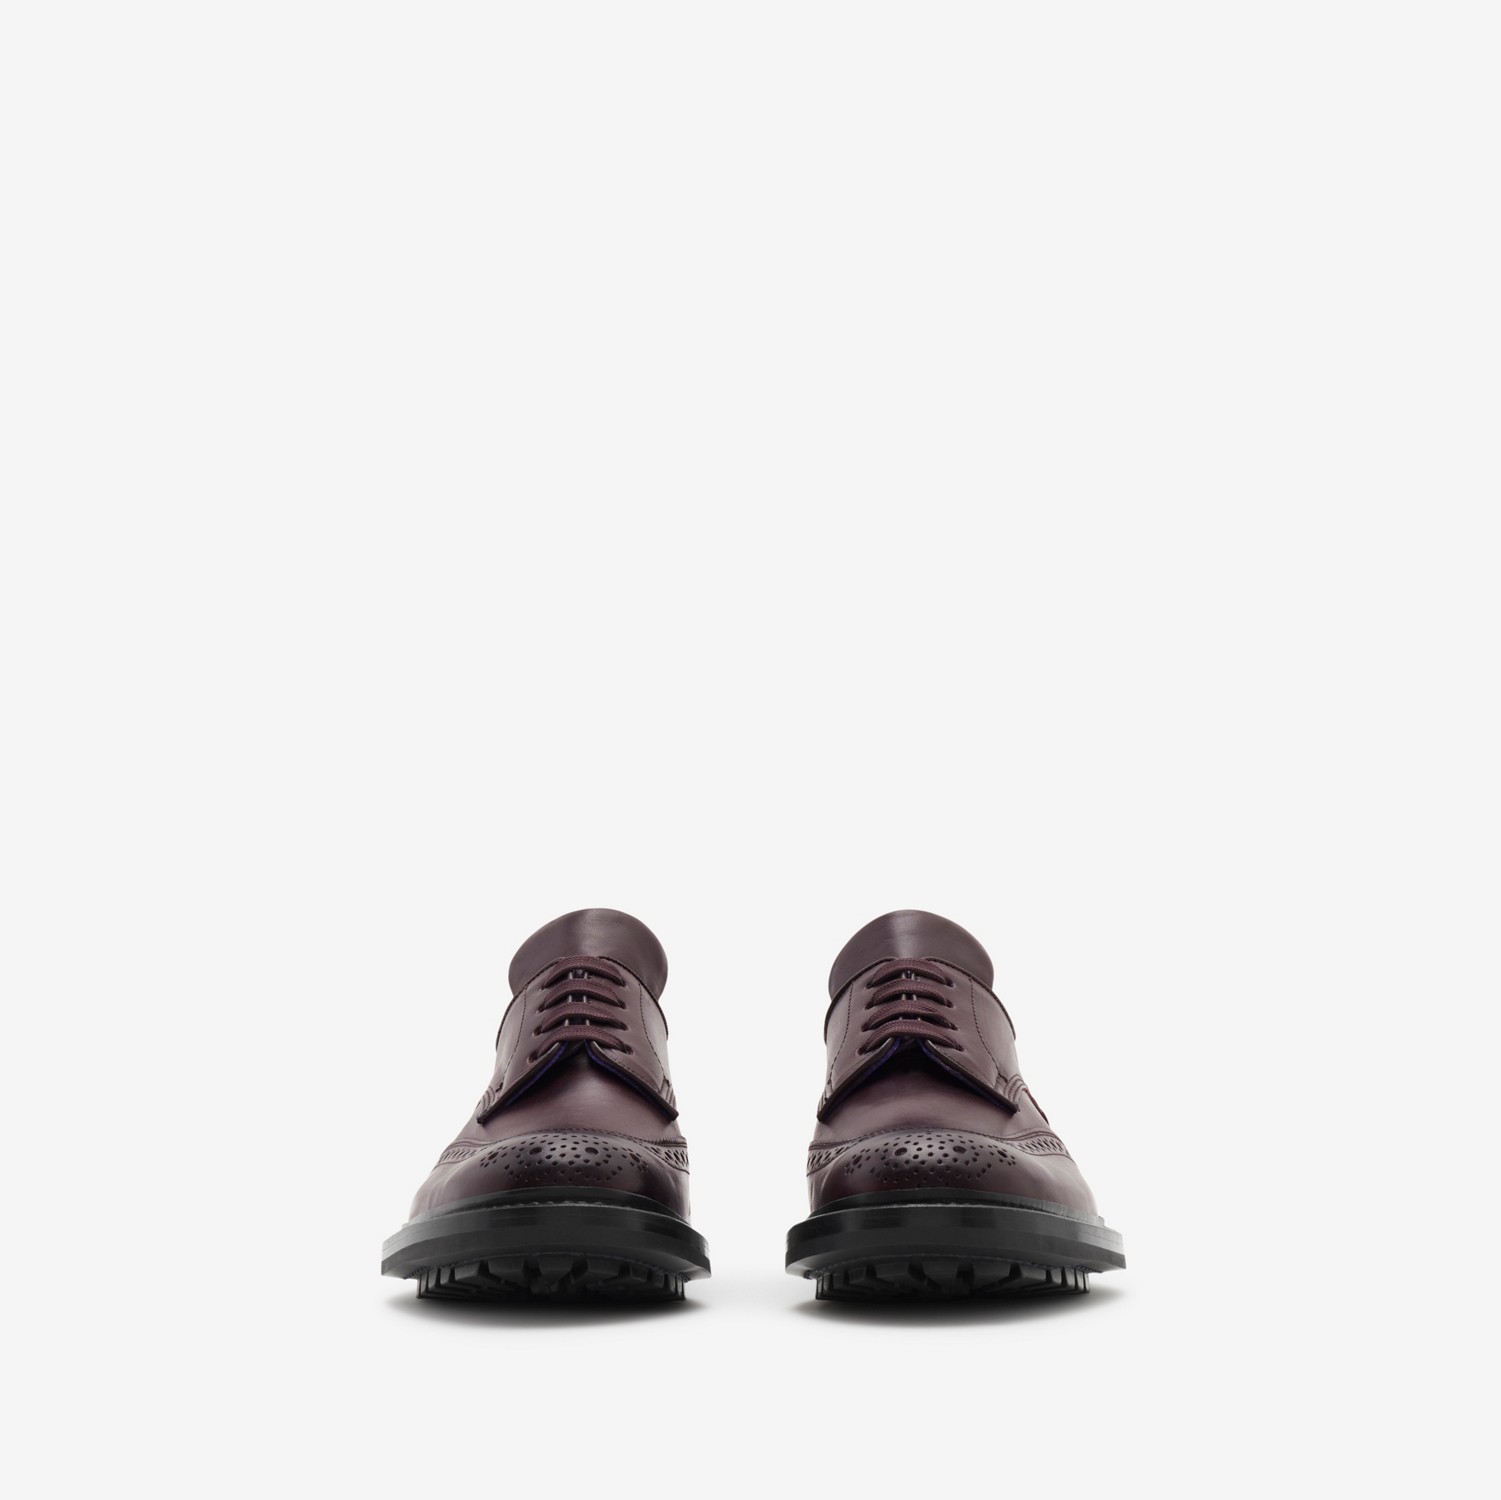 Tricker’s Leather Devon Brogues in Aubergine | Burberry® Official